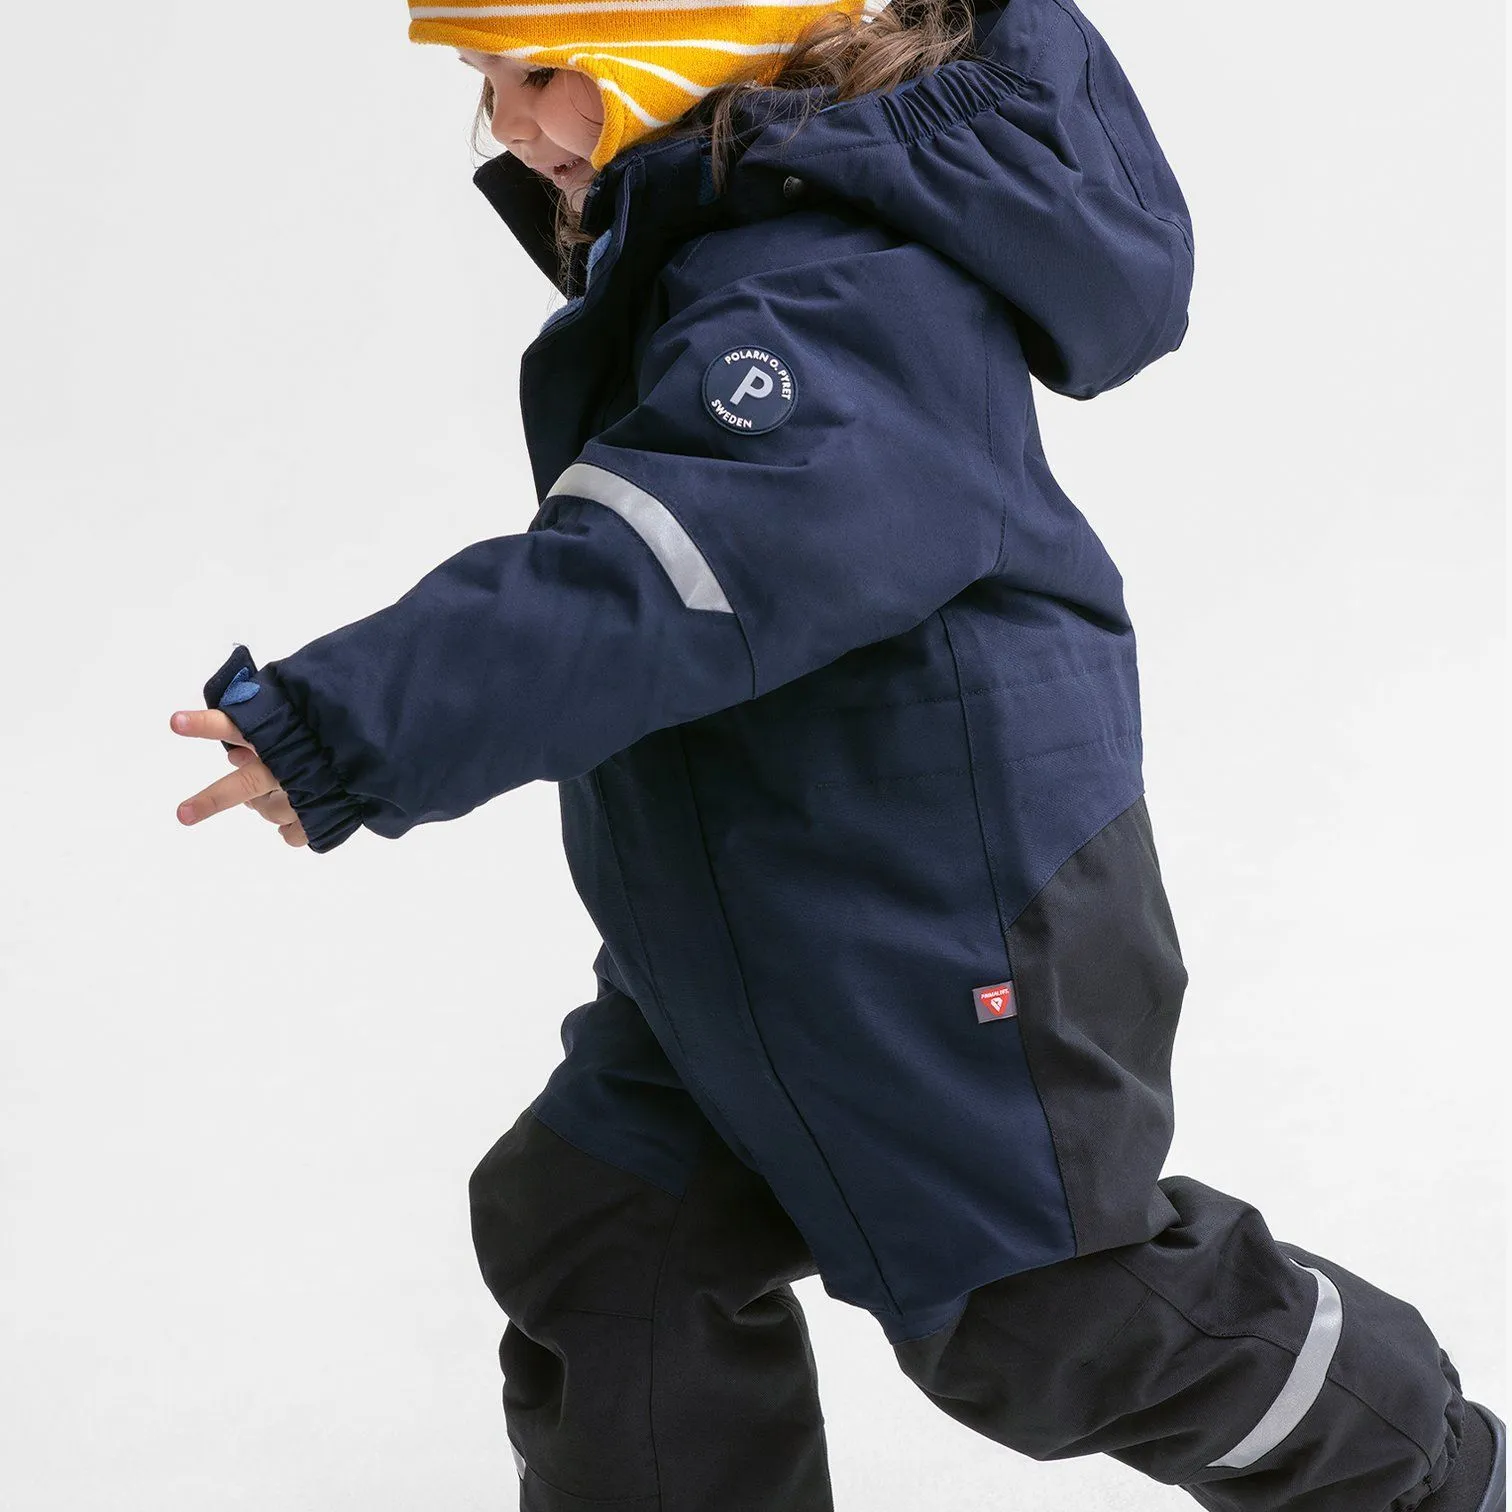 The Kids Waterproof Padded Winter Overall was voted 'Best Children's Snowsuit of 2021'.